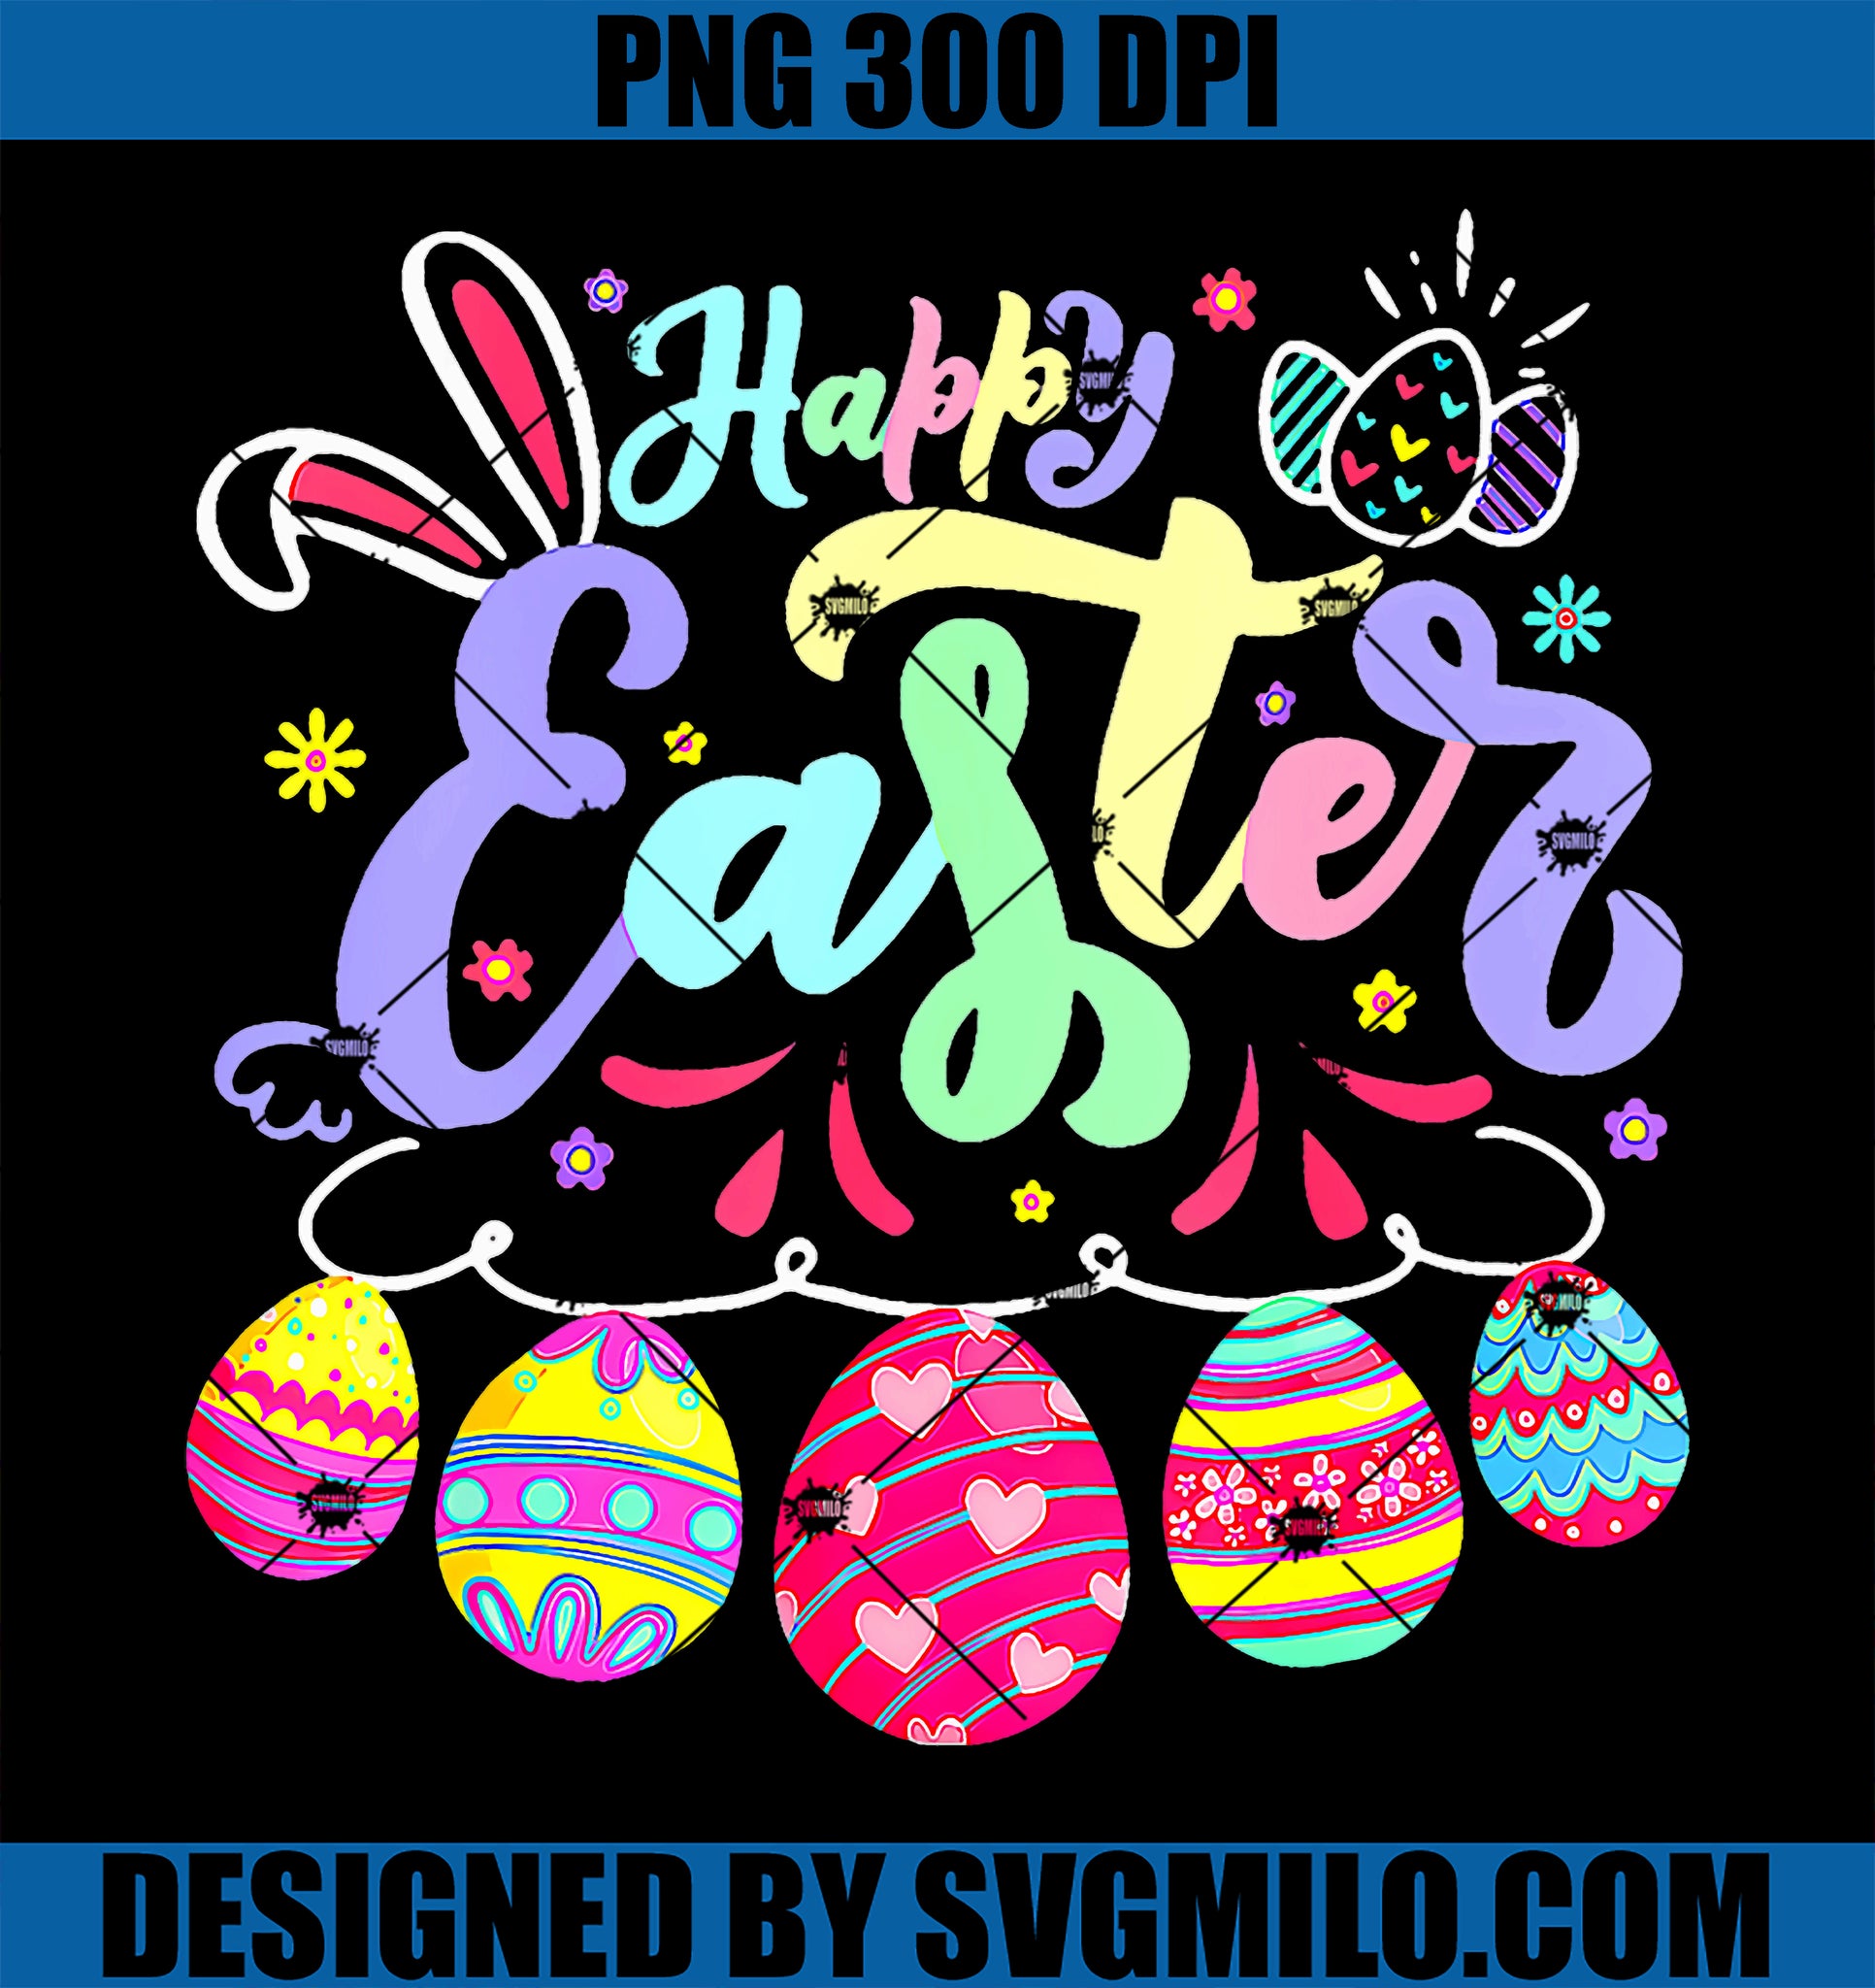 Happy Easter Bunny Rabbit Face PNG, Funny Easter Day PNG